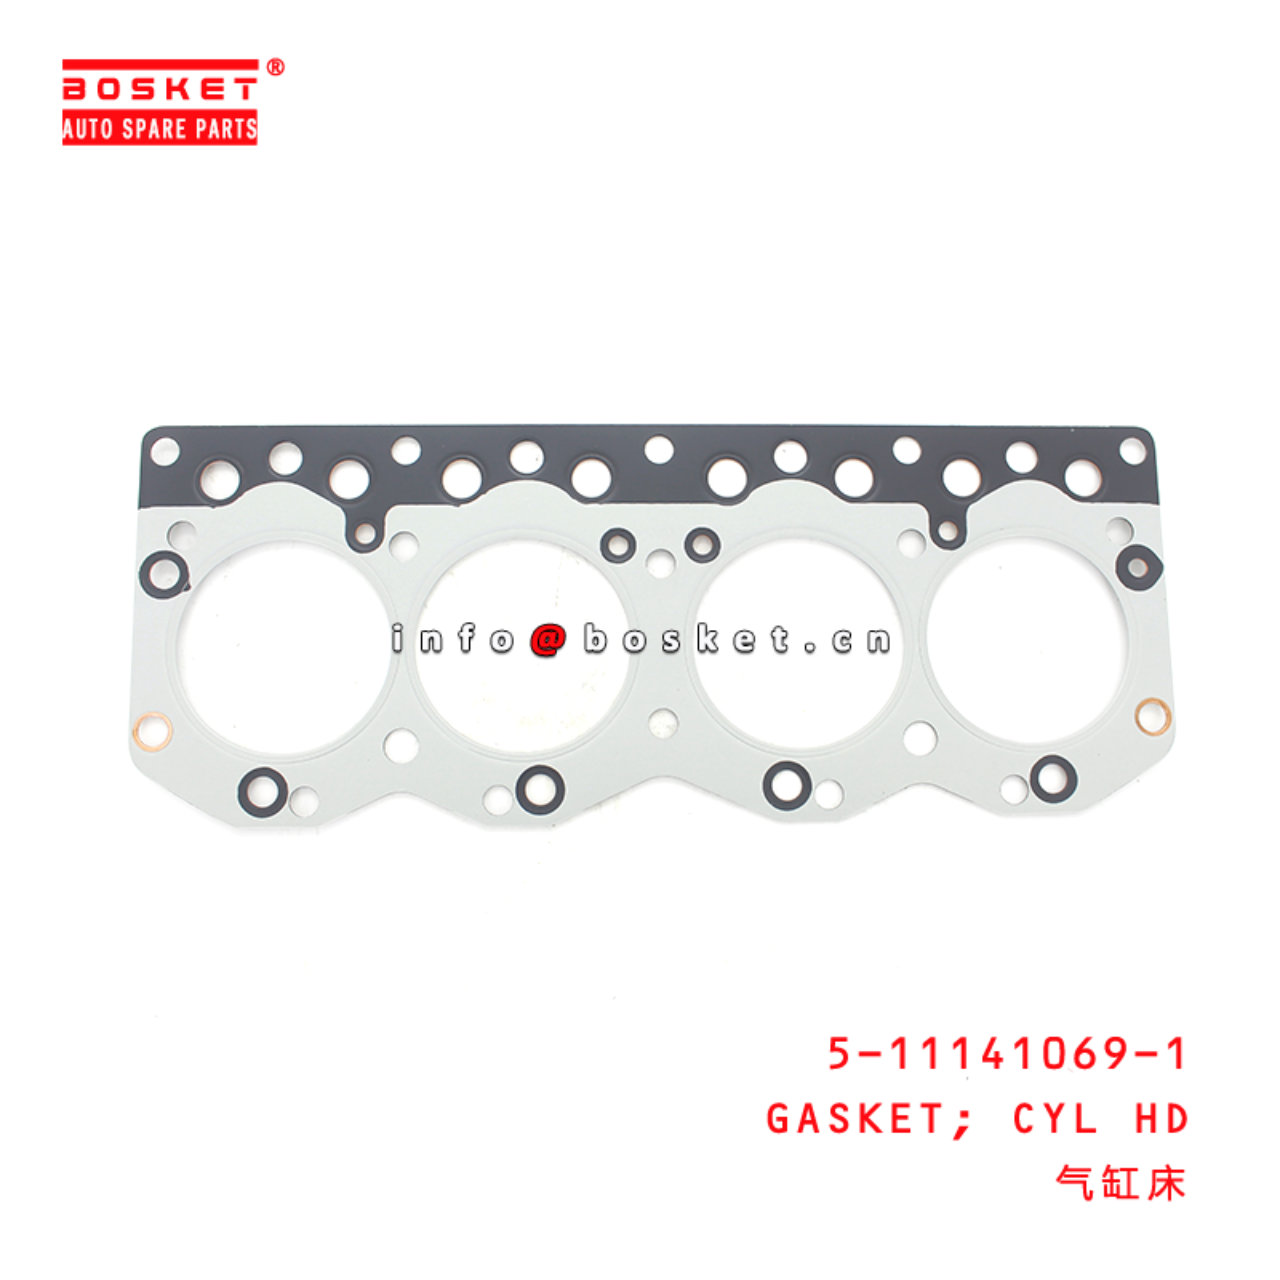 1-87814095-0 With Gasket Water Pump Assembly Suita...